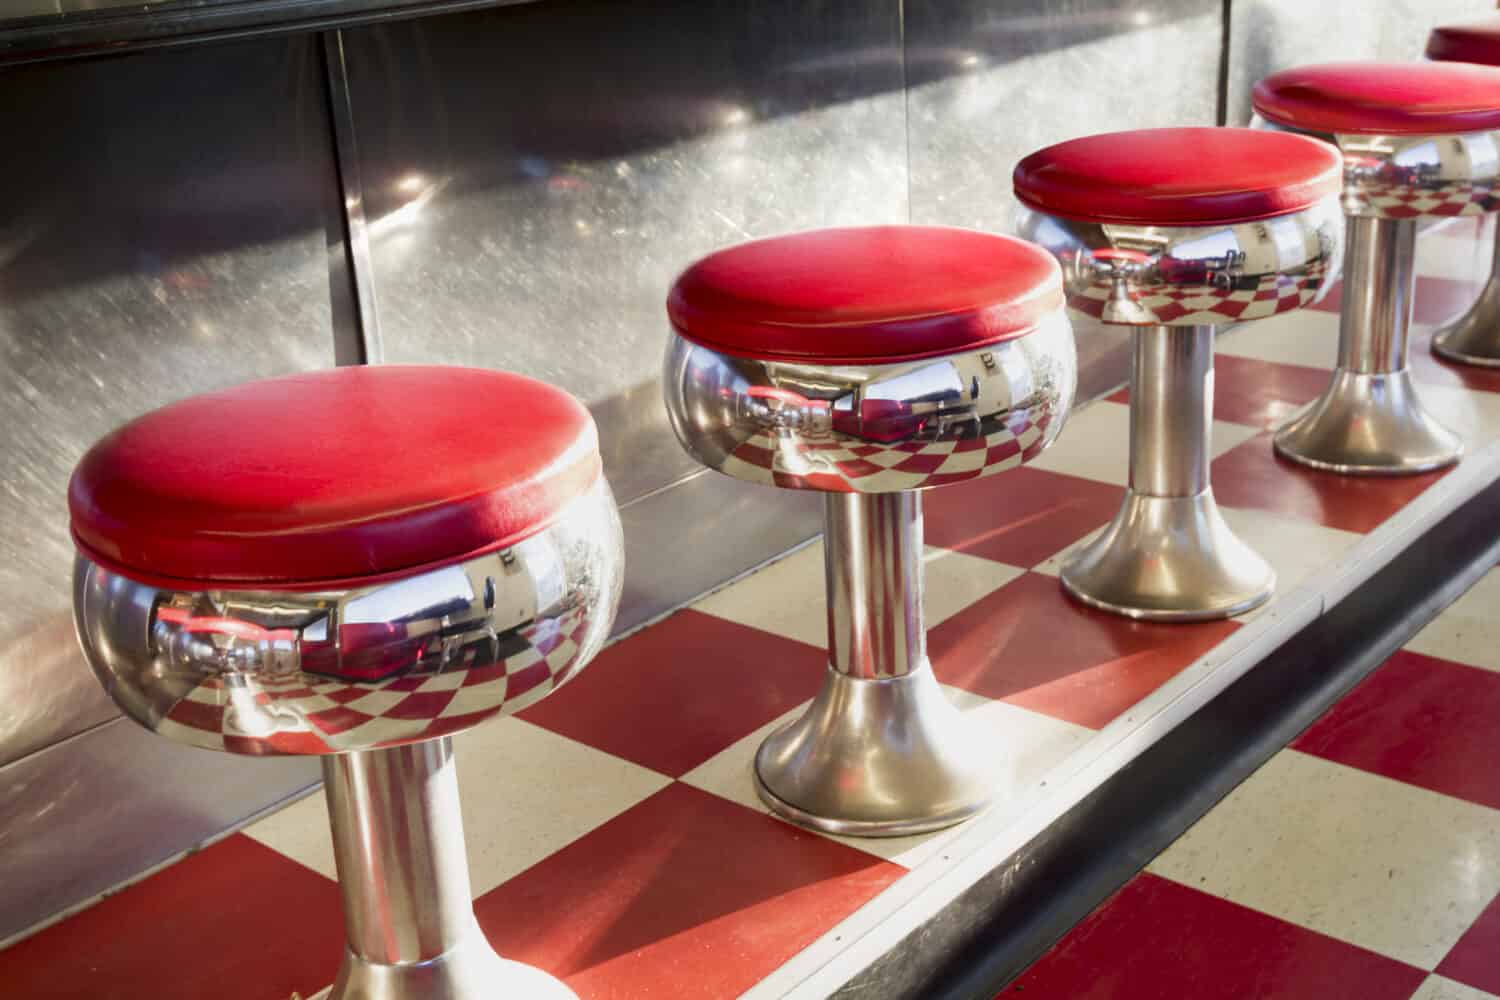 Warm morning sunlight highlights the simple but beautiful design of this classic diner counter with it's galvanized steel counter, bright chrome seats with red padding and bright red tiles.